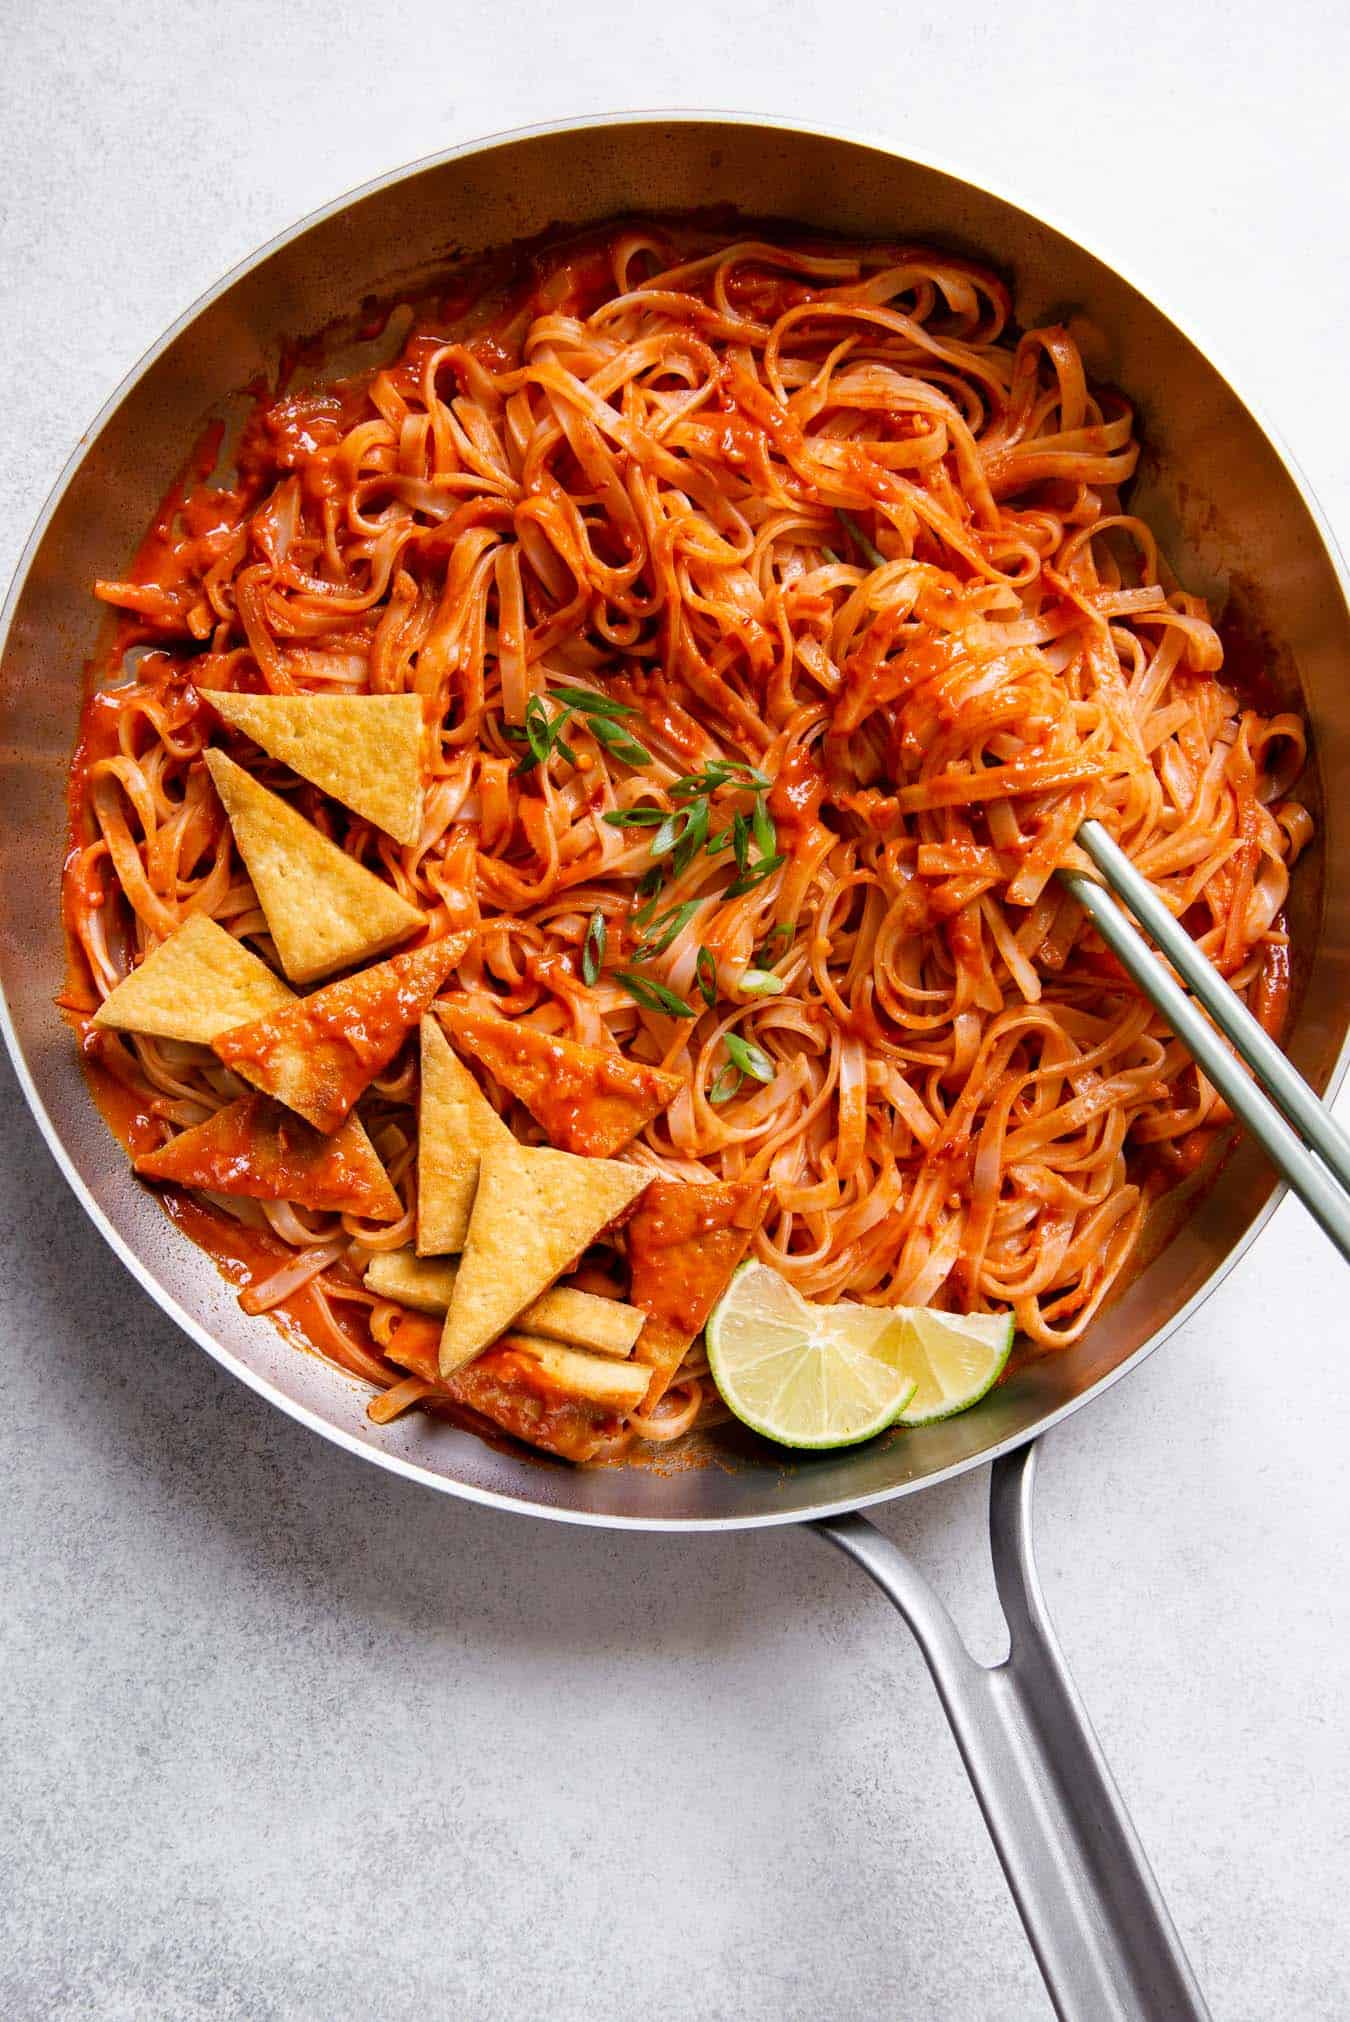 Spicy Noodles Recipe with Pan-Fried Tofu 1